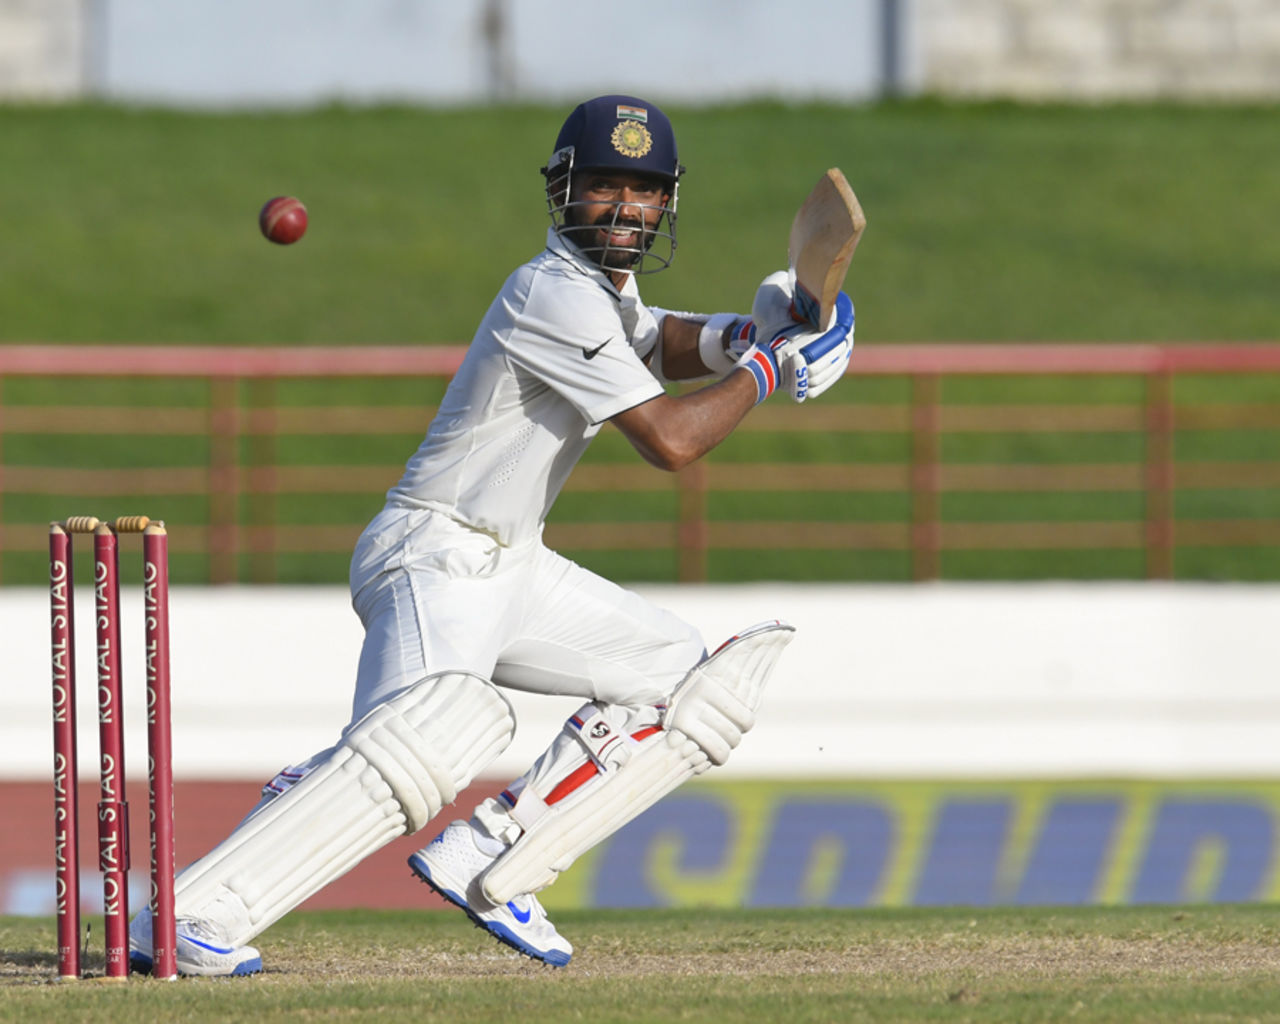 Ajinkya Rahane carves a boundary behind square, West Indies v India, 3rd Test, Gros Islet, 4th day, August 12, 2016